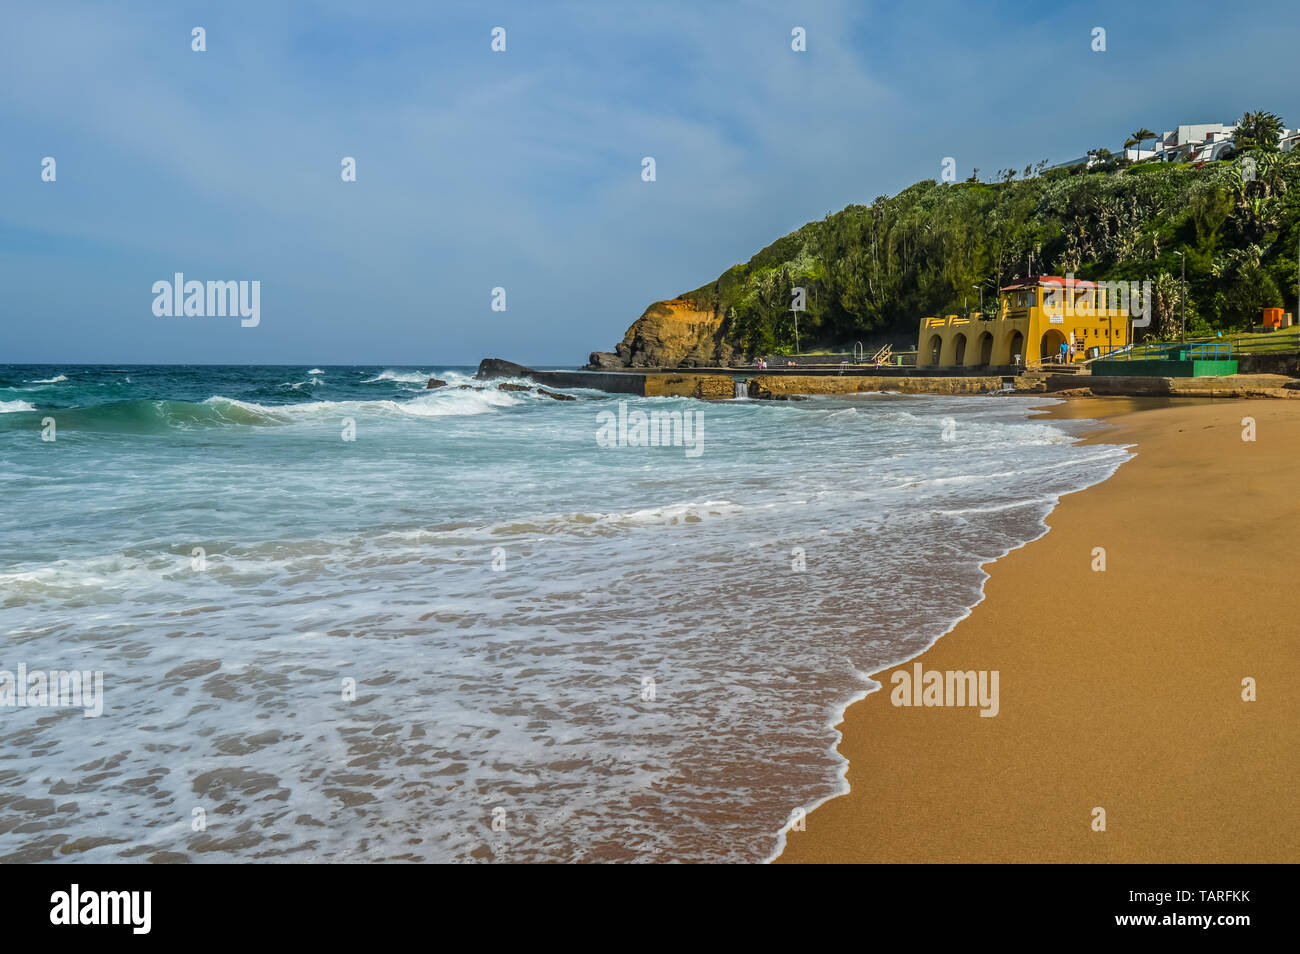 Thompsons bay beach, Picturesque sandy beach in a sheltered cove with a tidal pool in Shaka's Rock, Dolphin Coast Durban north KZN South Africa Stock Photo